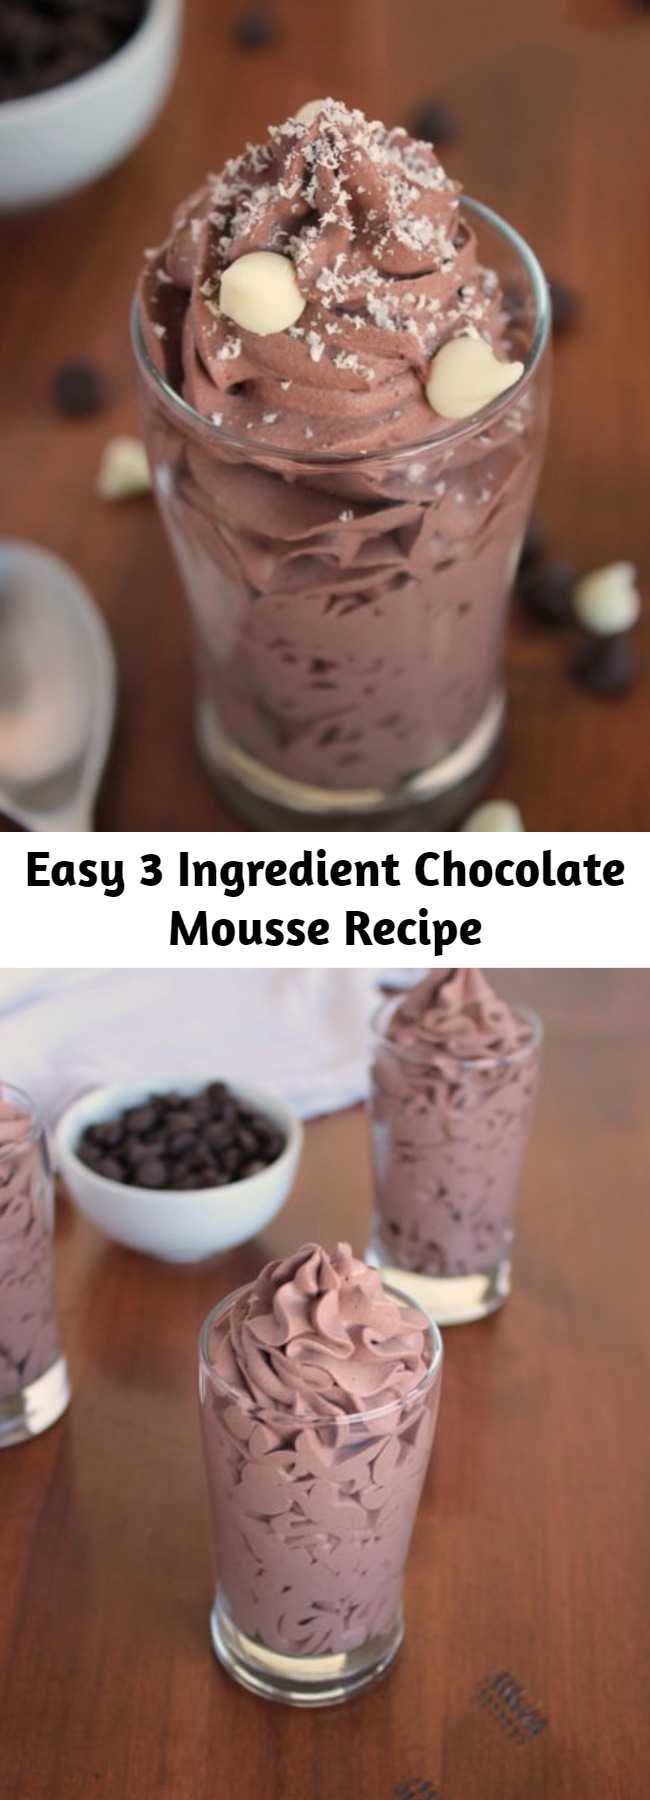 Easy 3 Ingredient Chocolate Mousse Recipe - This 3-Ingredient Chocolate Mousse is light, chocolate-y, smooth and whips up in less than 5 minutes. It's a perfect dessert for any night of the week! Also, a great frosting recipe for light, airy mousse frosting for cupcakes and cakes!